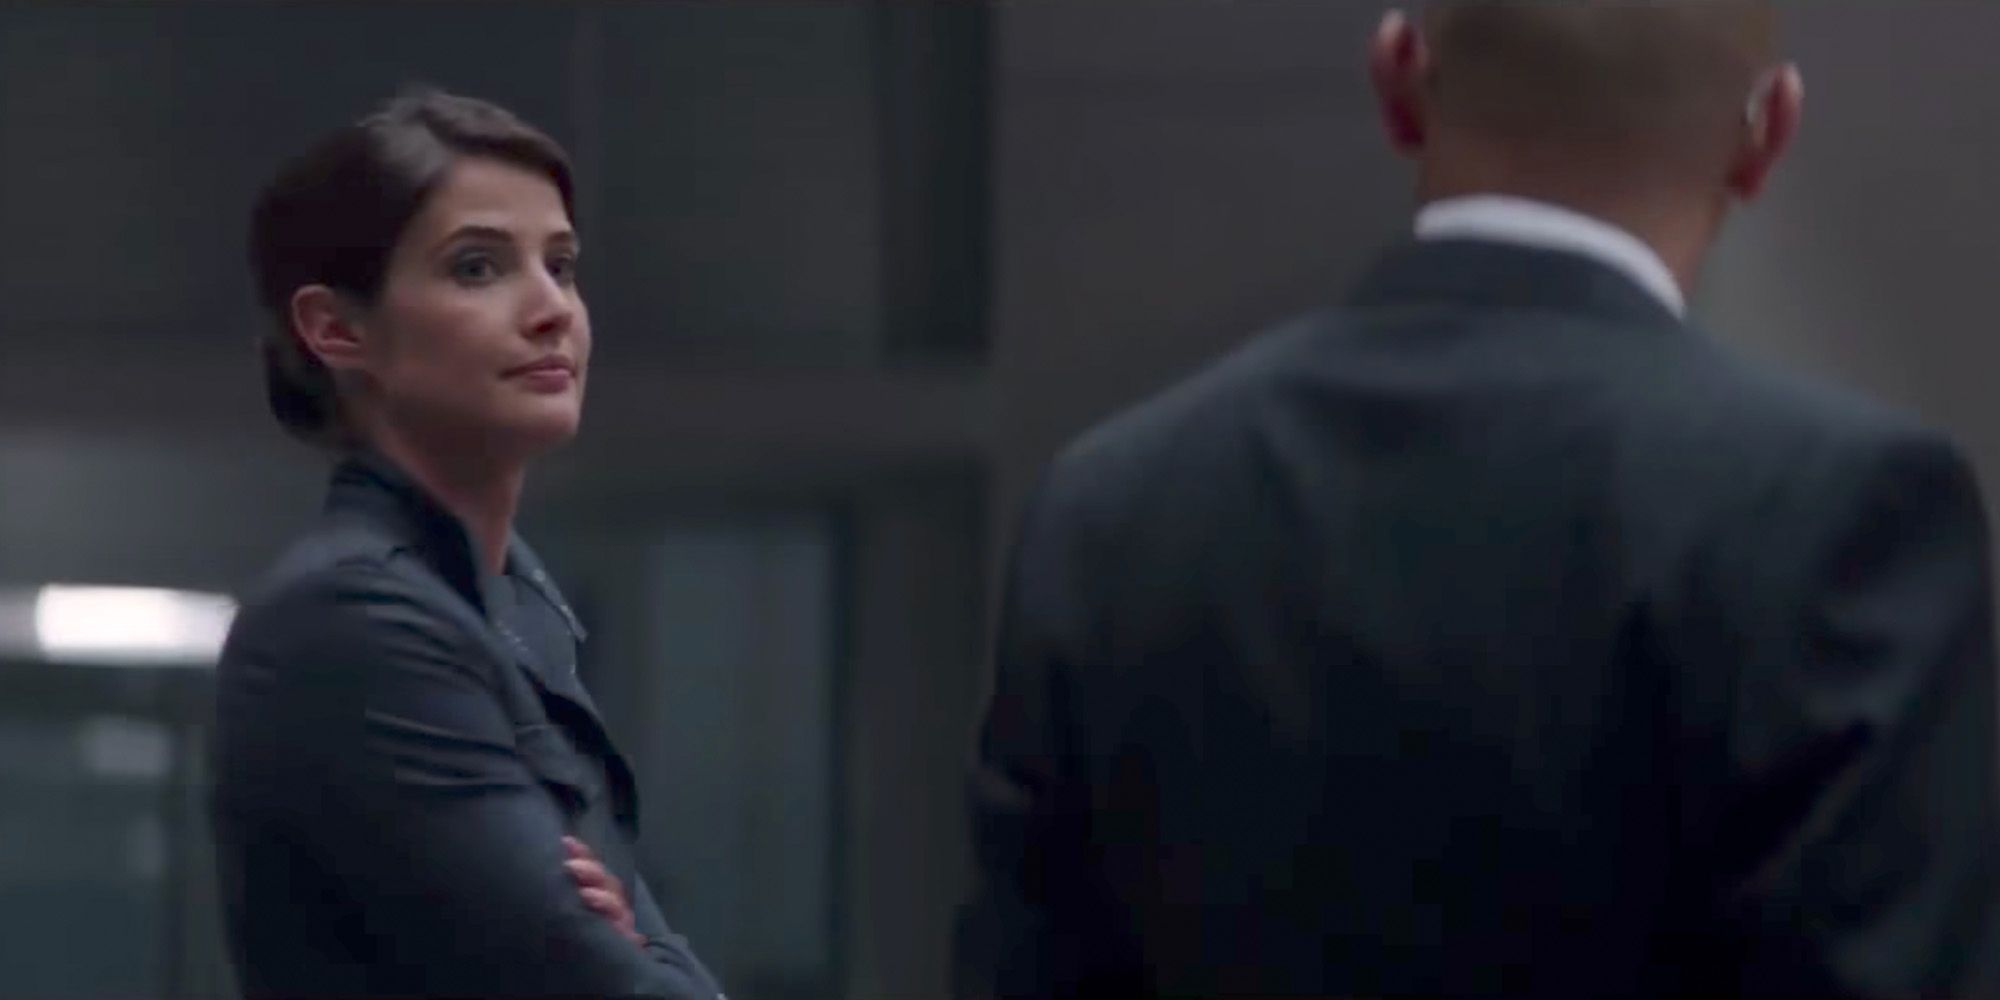 Maria Hill speaks with Jasper Sitwell in a deleted scene from Captain America The Winter Soldier